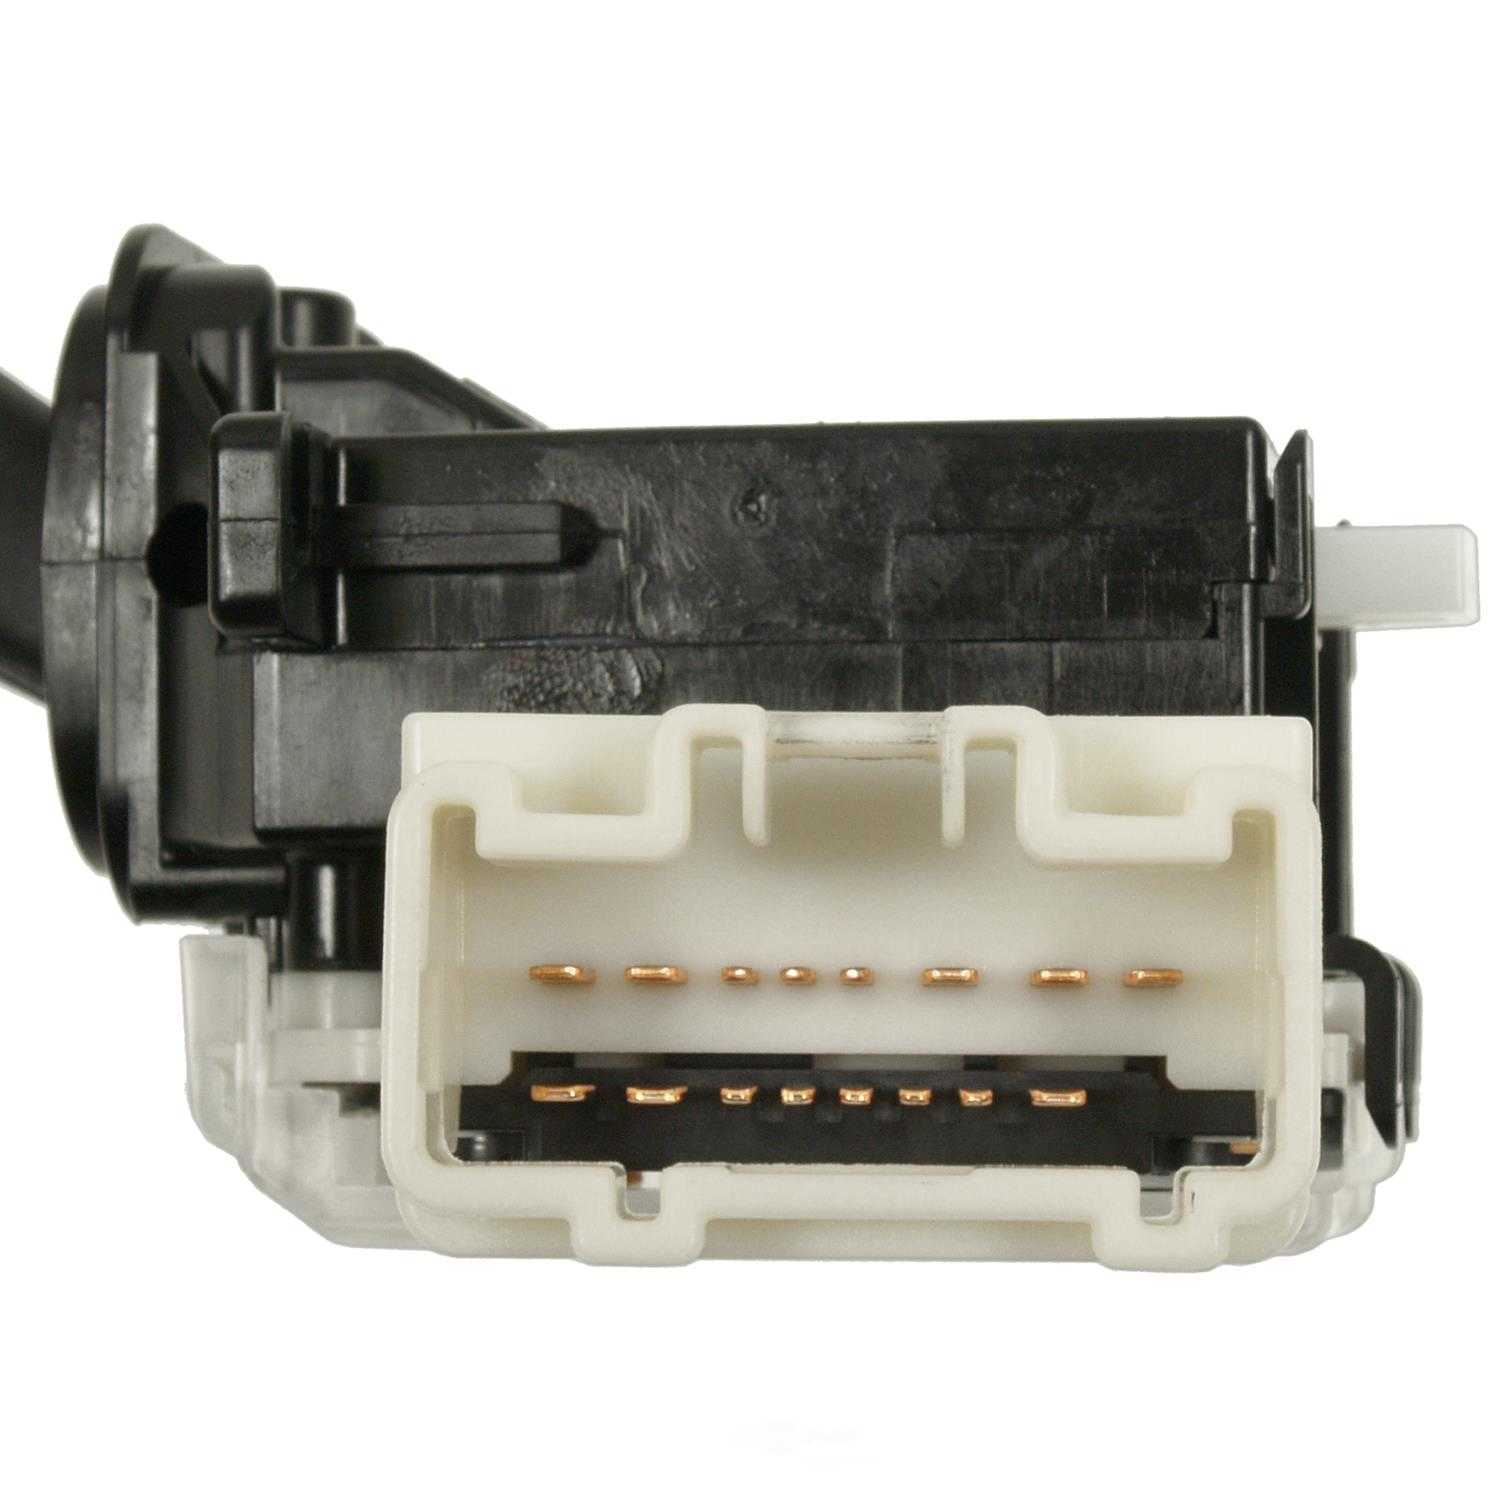 STANDARD MOTOR PRODUCTS - Dimmer Switch - STA CBS-1885